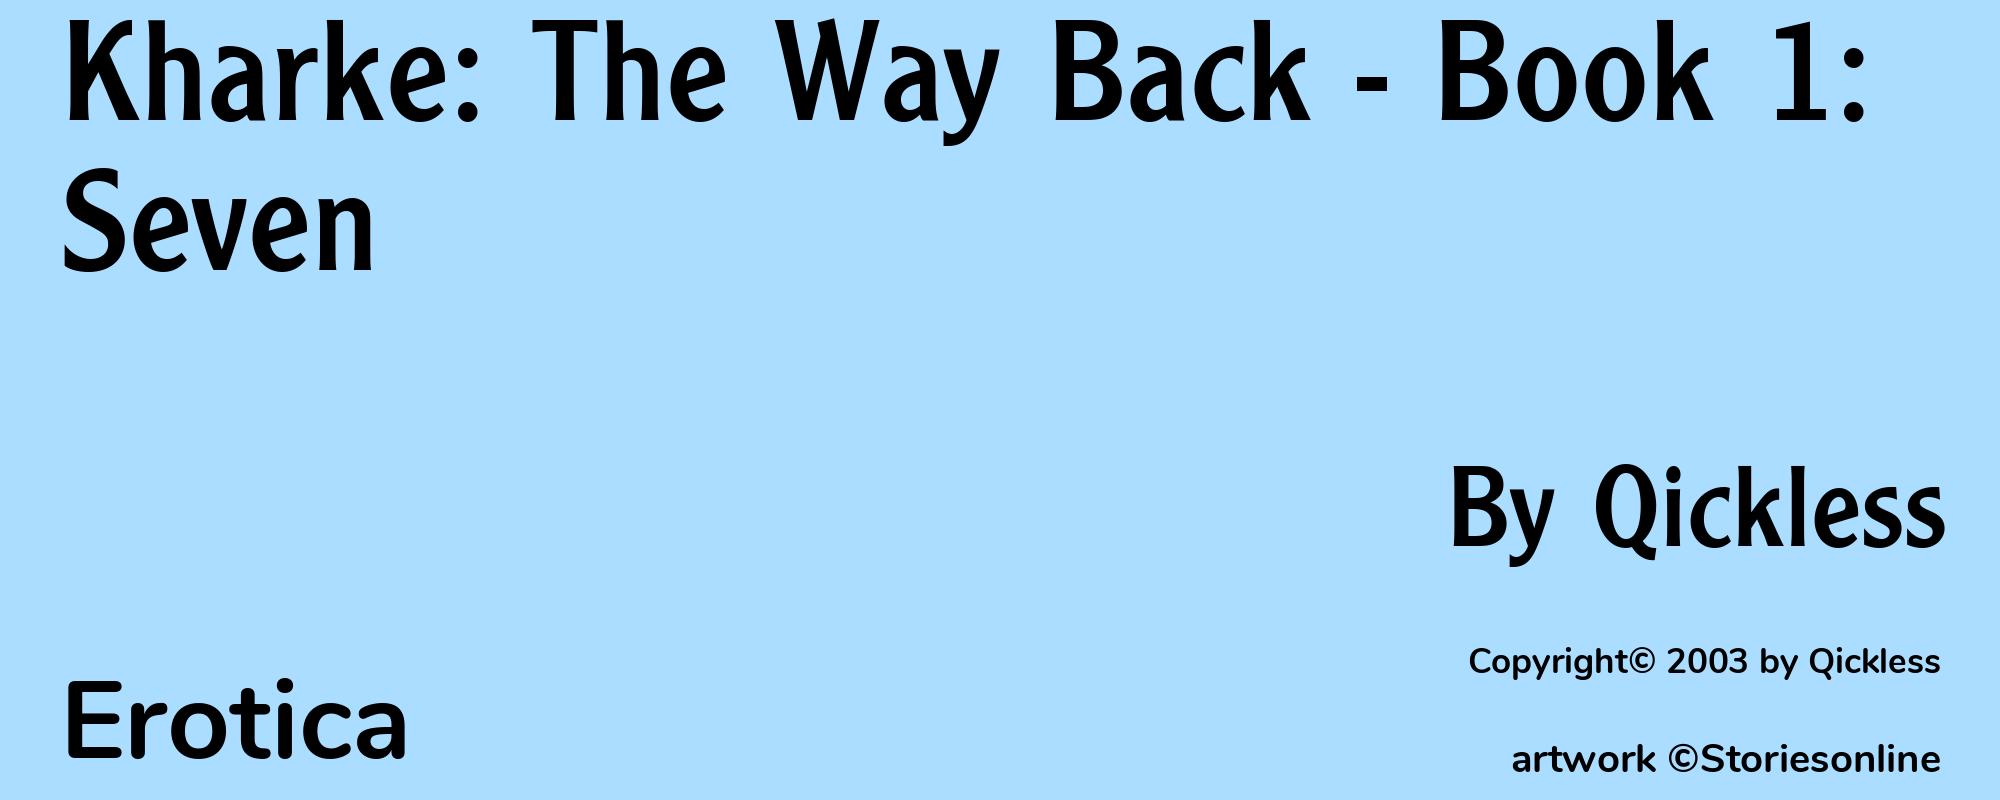 Kharke: The Way Back - Book 1: Seven - Cover